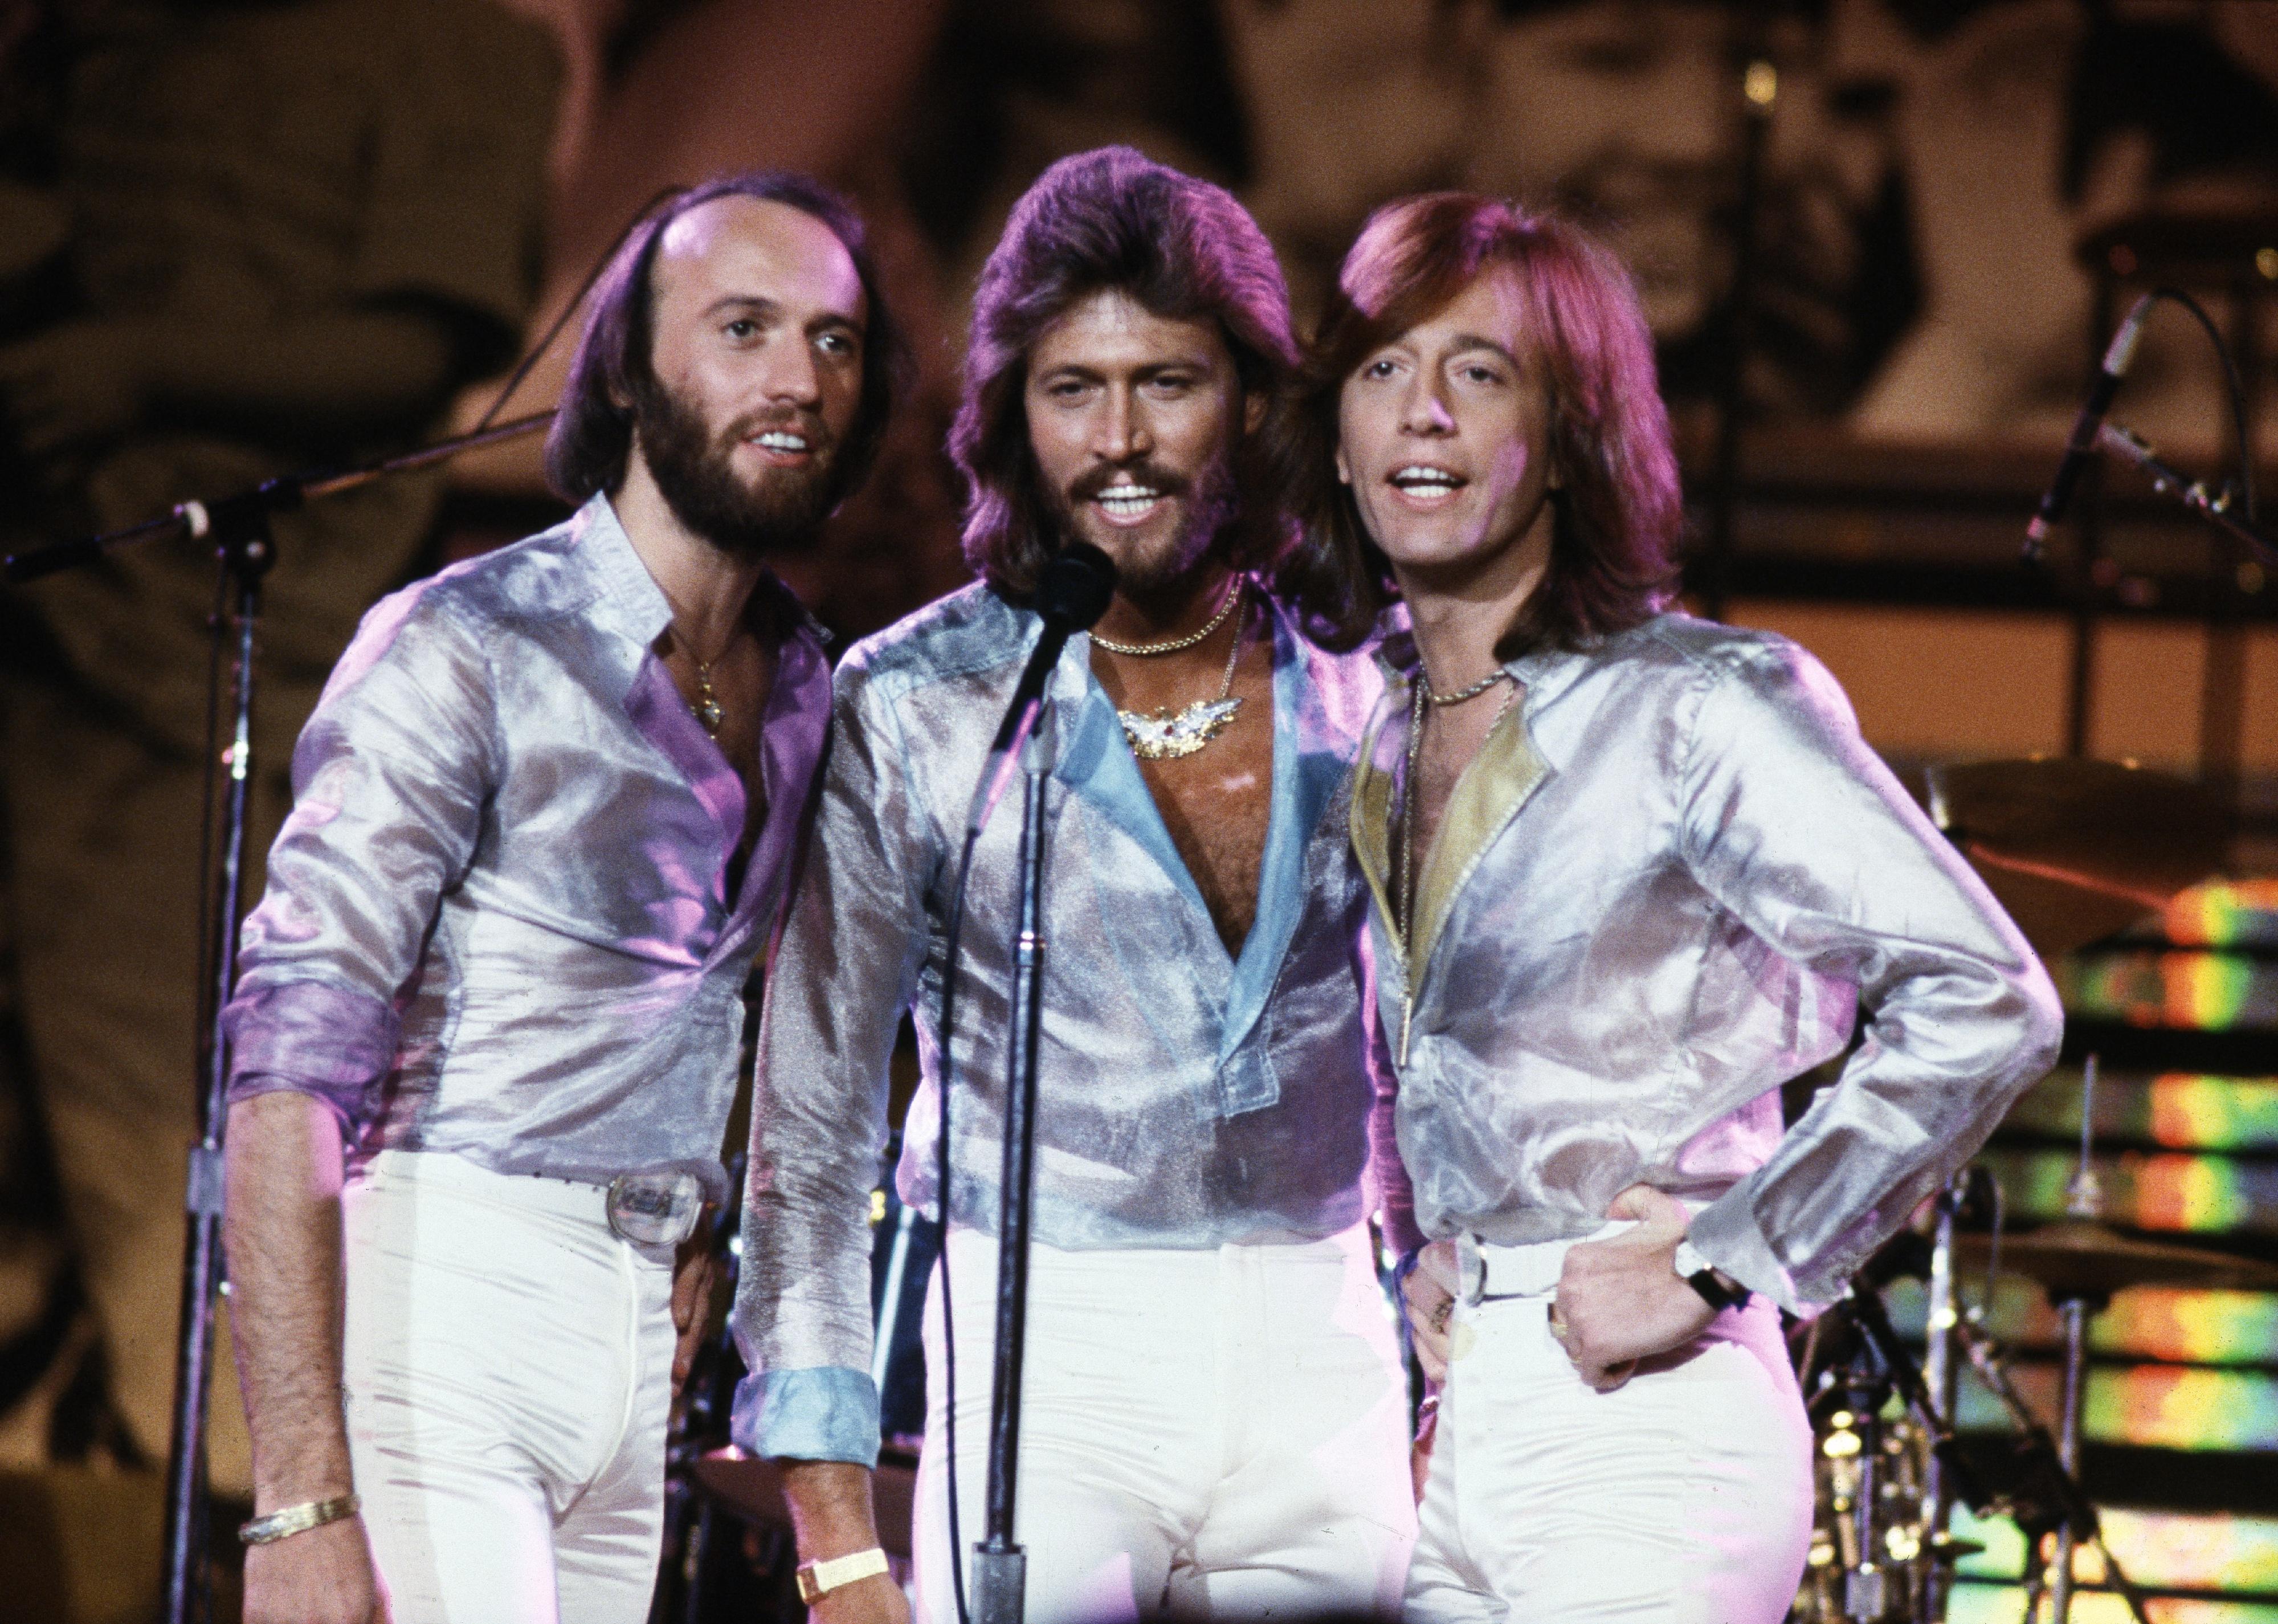 The Bee Gees wearing silver shirts onstage.